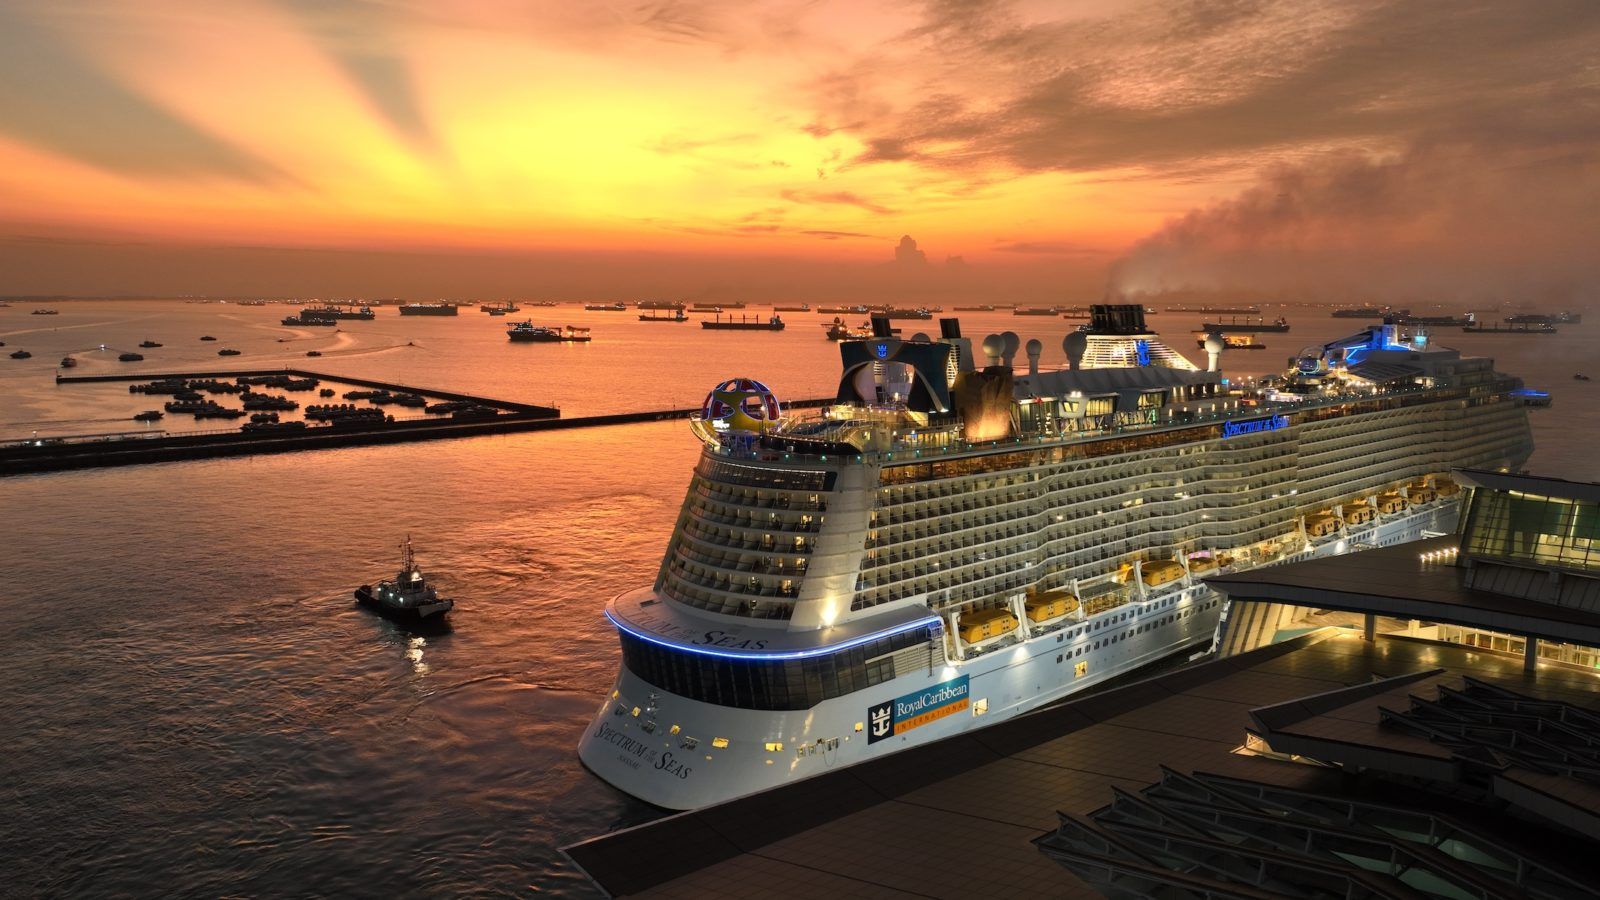 Review: Royal Caribbean’s Spectrum of the Seas is an action-packed adventure on water